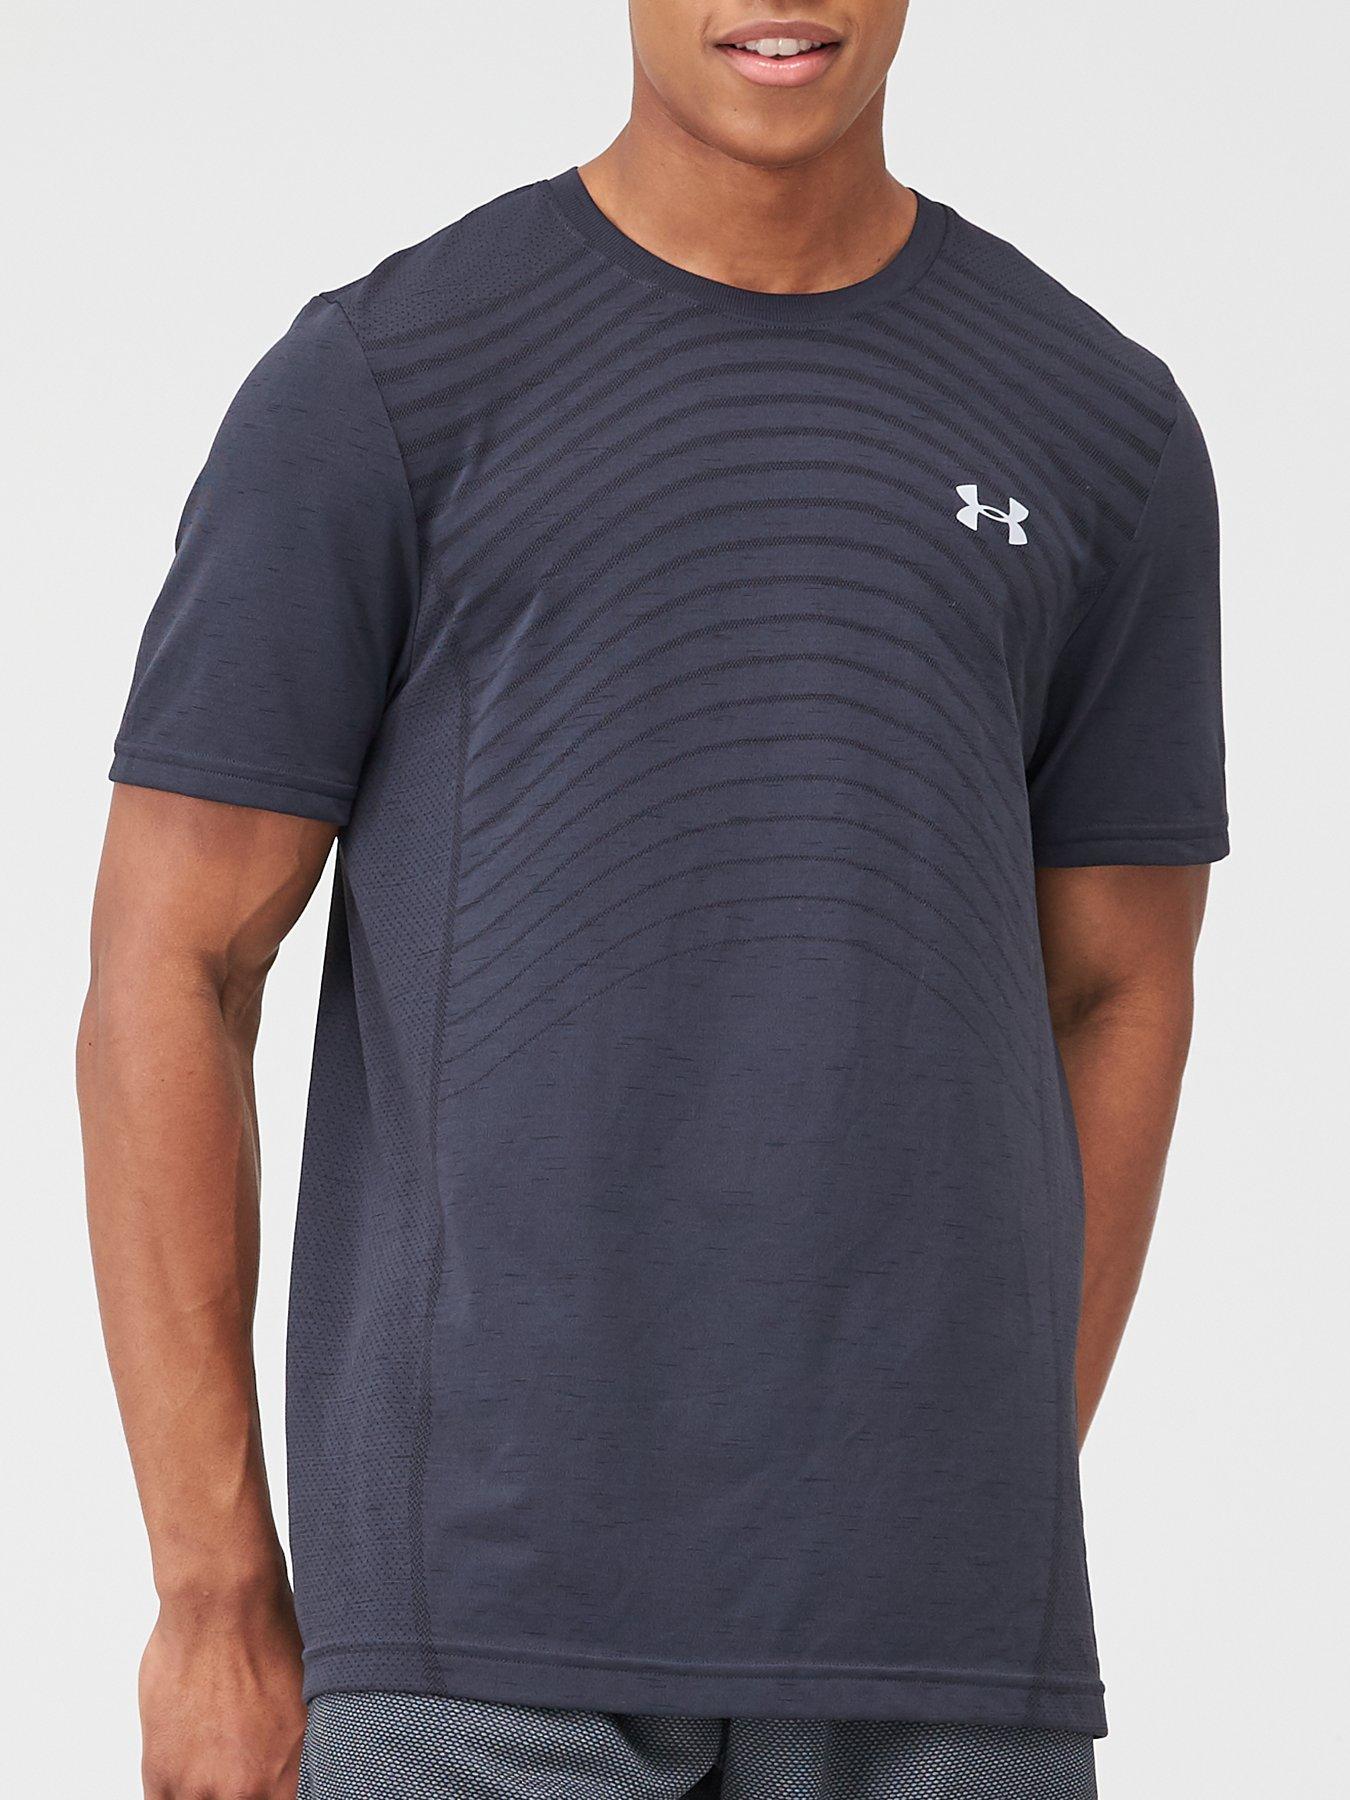 UNDER ARMOUR Seamless Wave T-Shirt - Black/Grey | very.co.uk